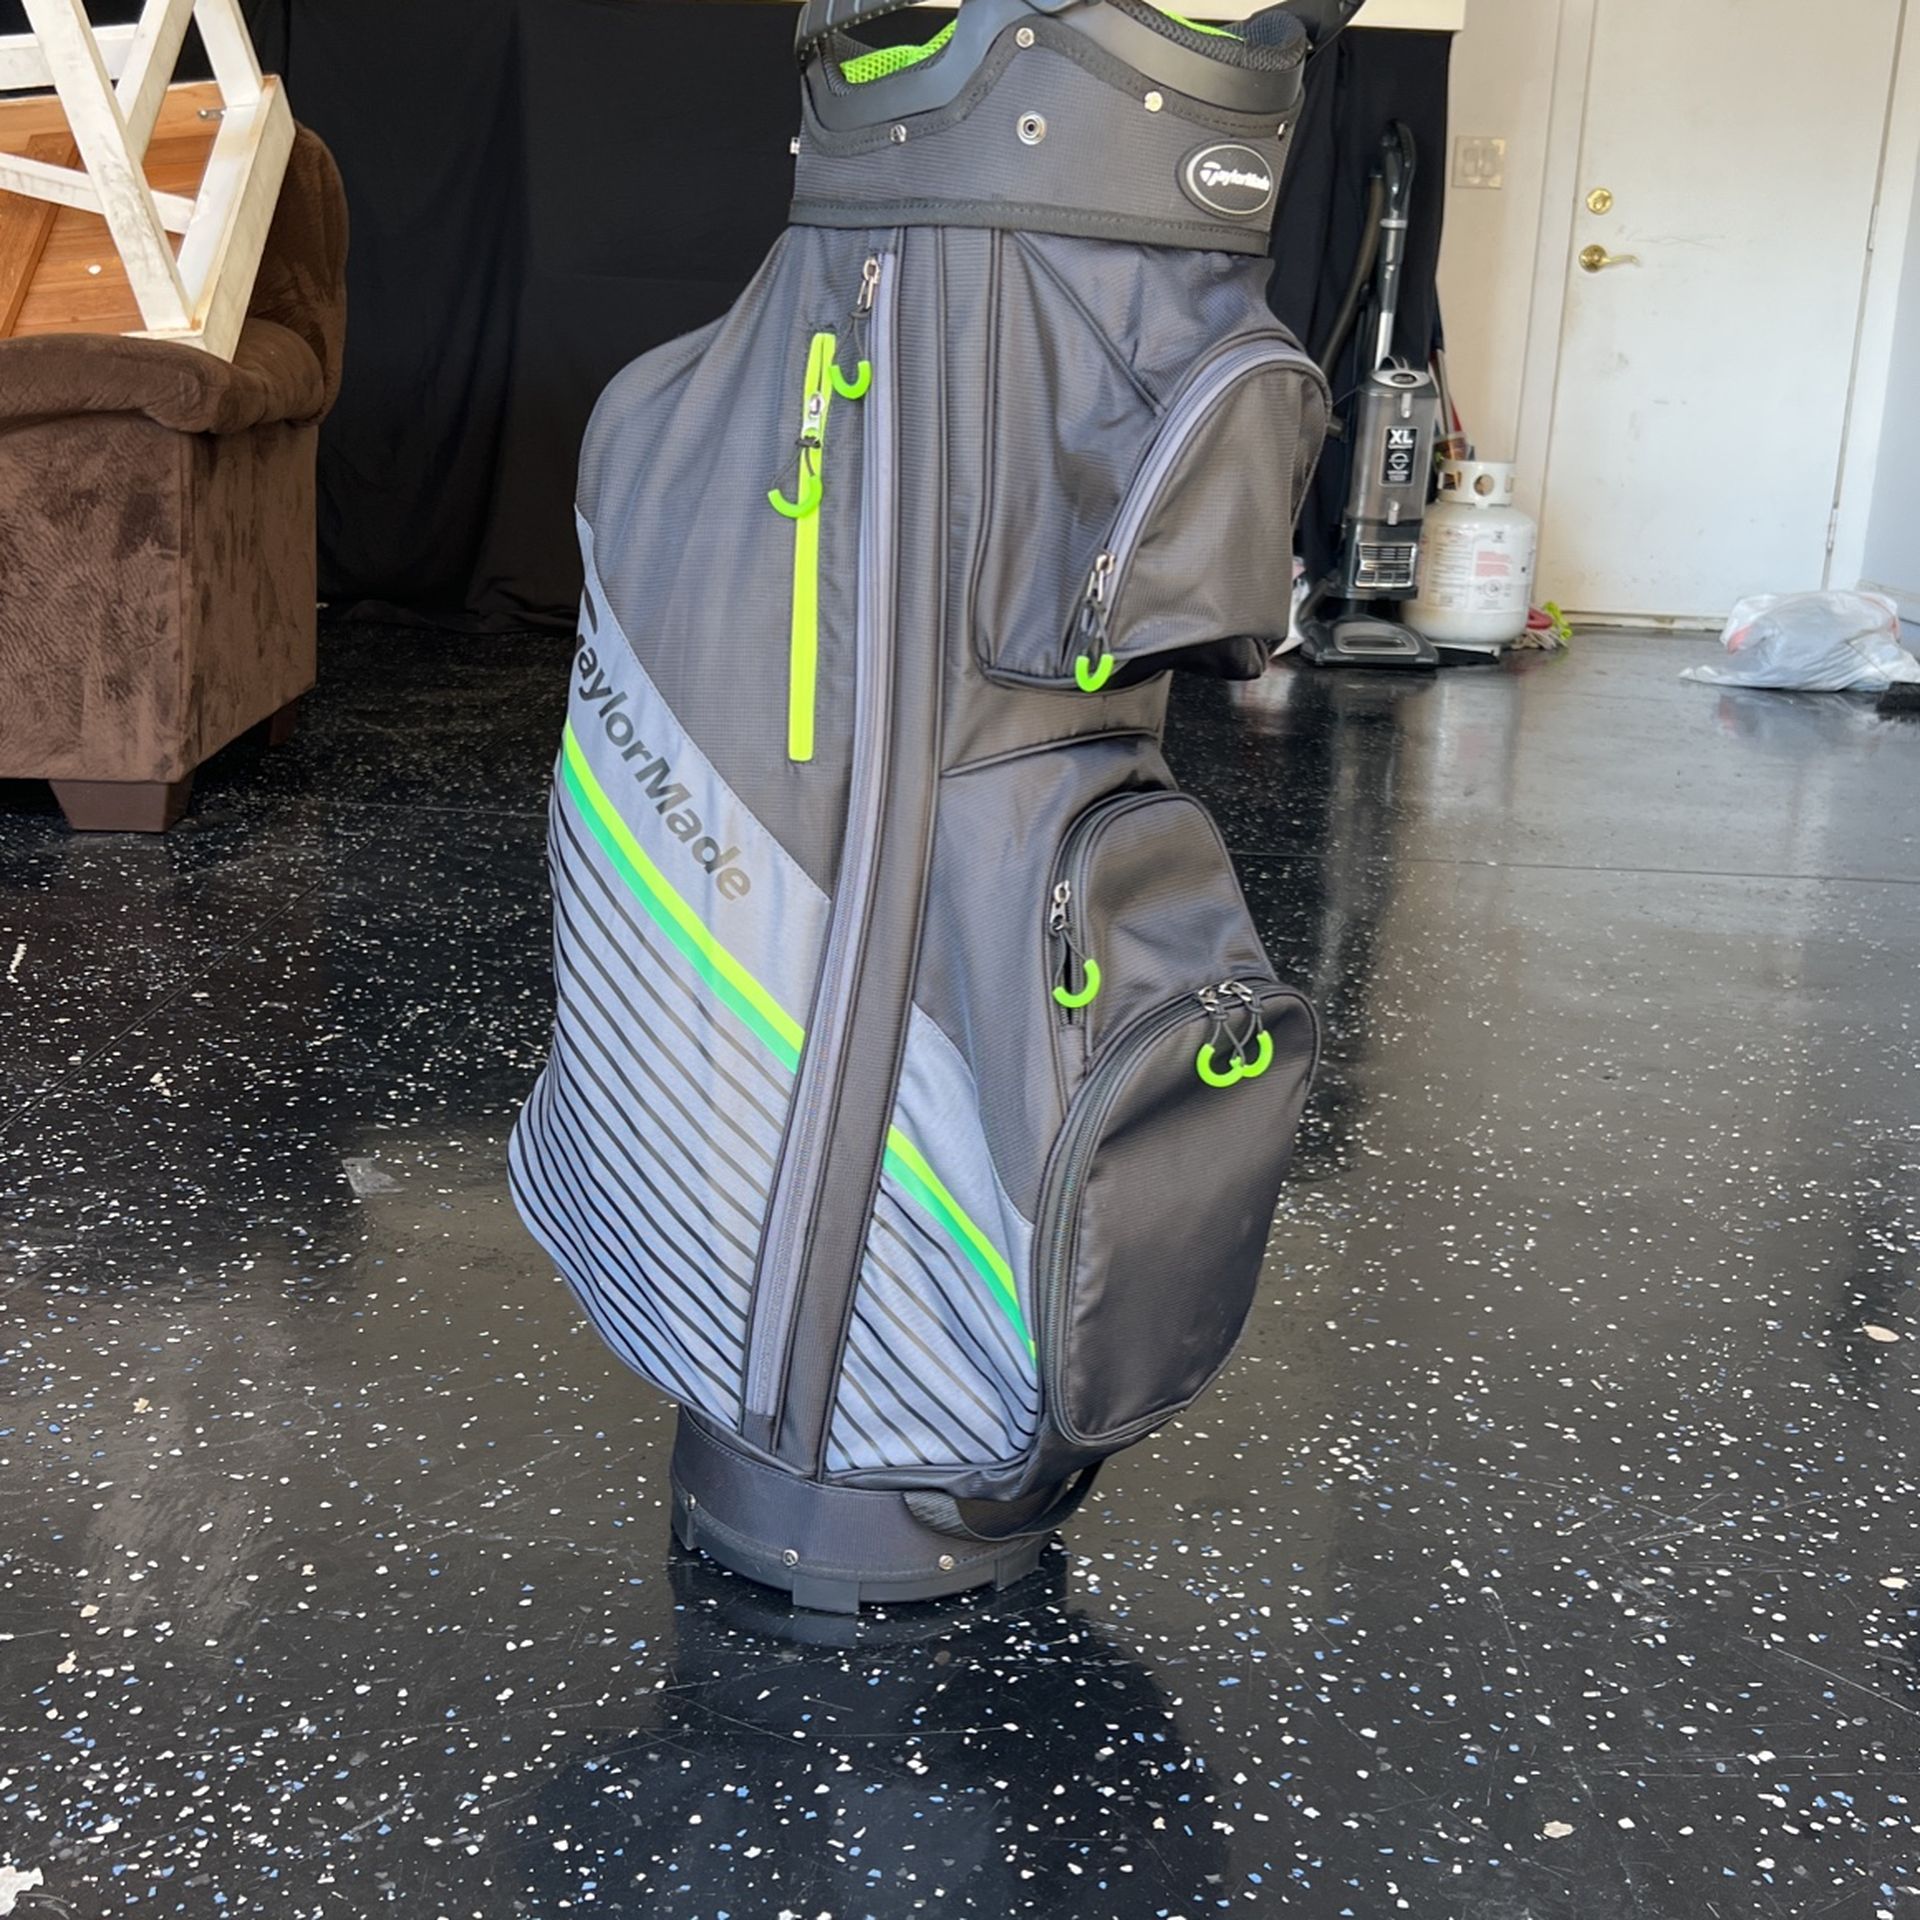 Stuff For Sale: Golf Bag Bicycle And Motorcycle